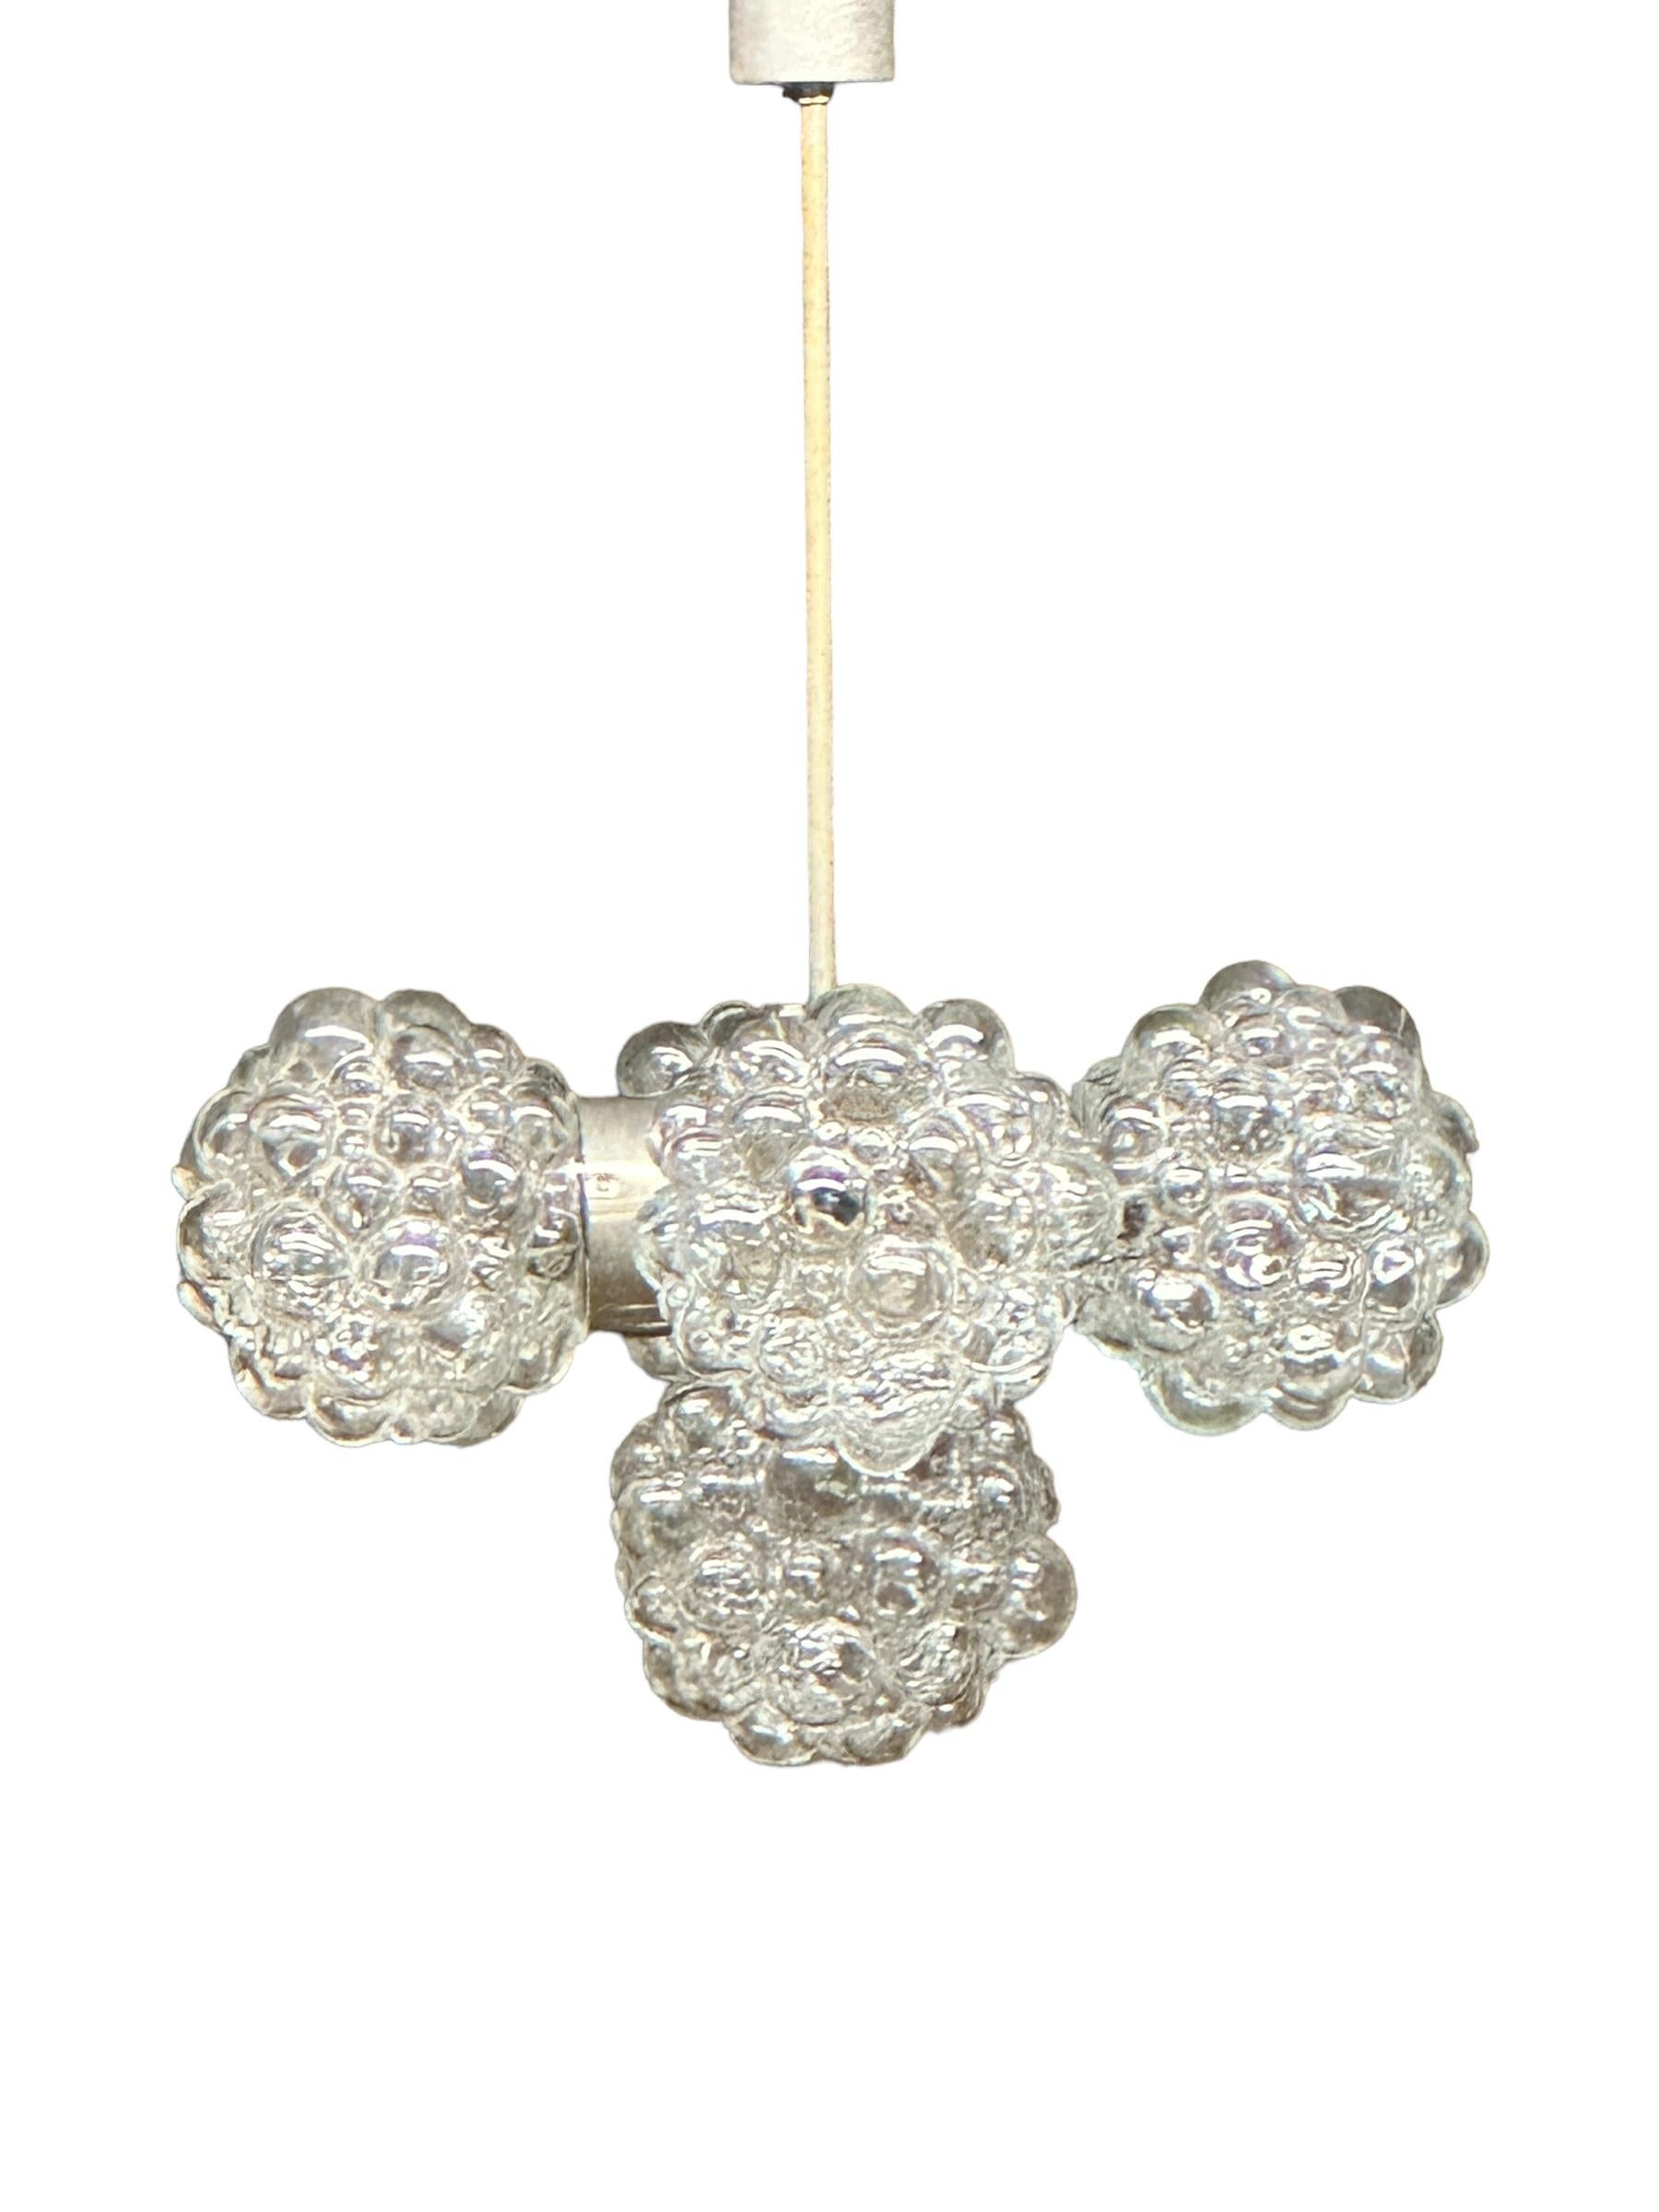 5 Light Bubble Glass Helena Tynell Style Chandelier, Austria 1960s For Sale 11